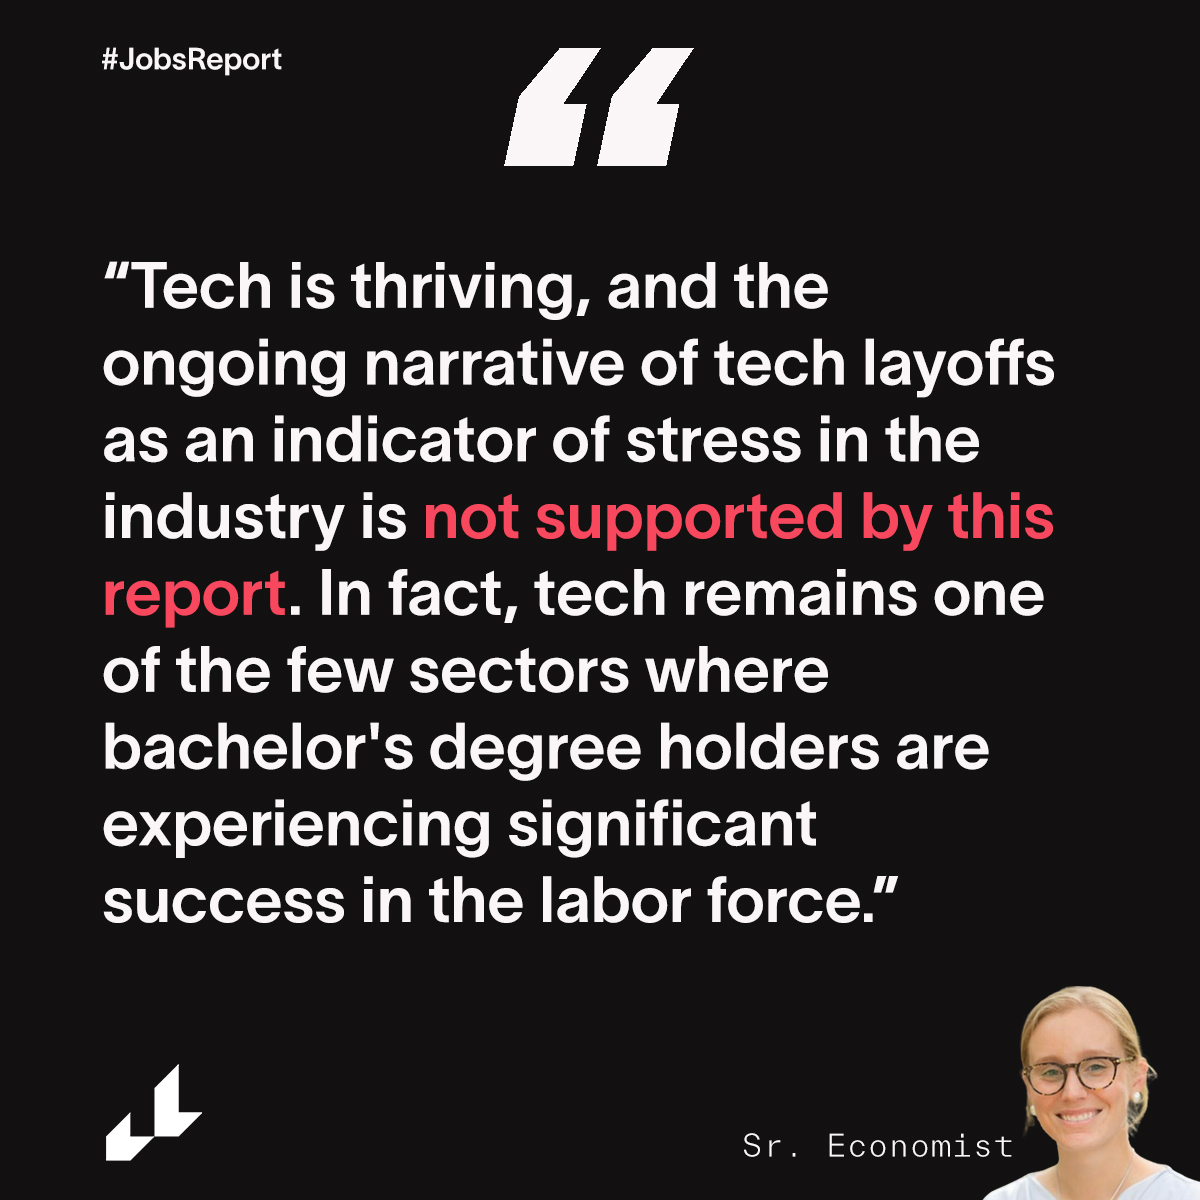 People who continue to use tech layoffs as an indicator of economic downturn are not looking at the big picture #jobsreport